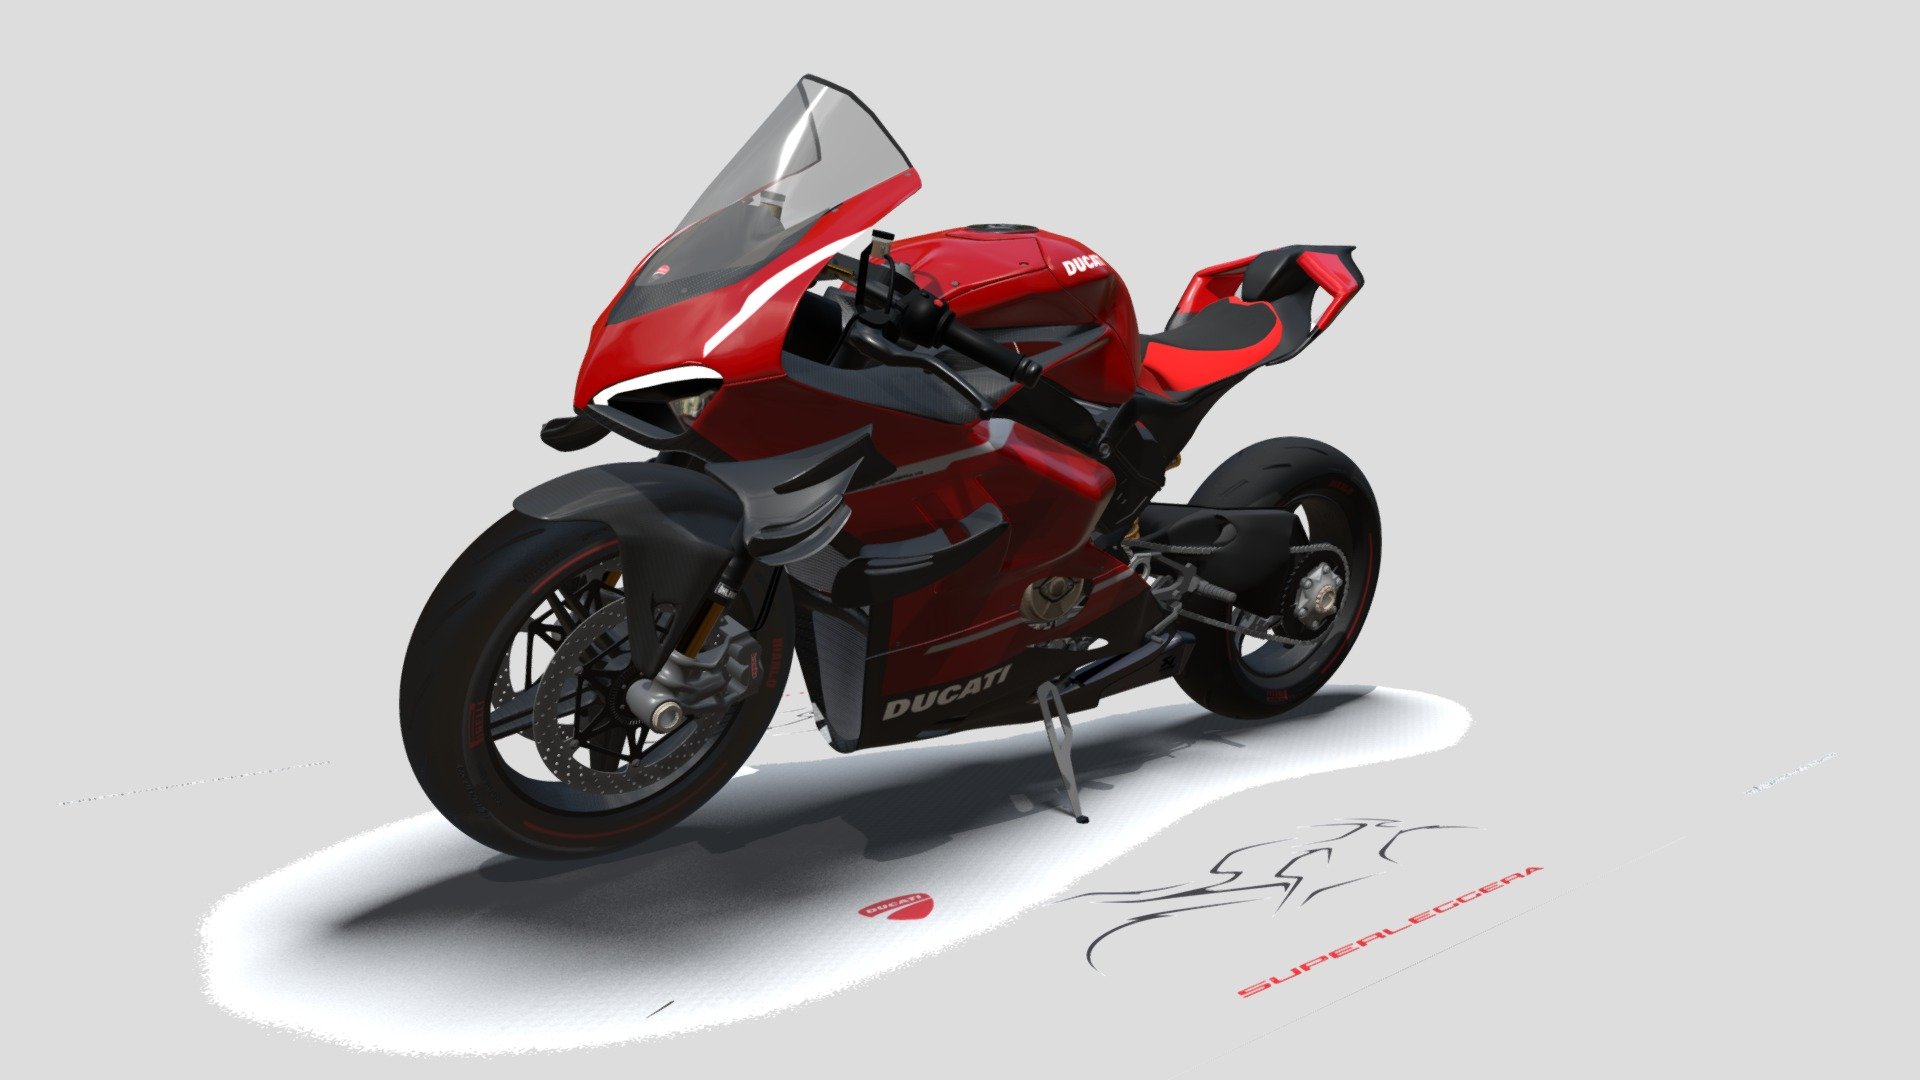 Superleggera V4
Produced in a limited edition of only 500 numbered units and accompanied by a certificate of authenticity, the new Superleggera V4 is the most exclusive Ducati ever produced.

my own modeling with various photo sources on social media, this modeling is not accurate according to the original motorbike
don't forget to credit the creator if you upload it on other media

link: behance:https://www.behance.net/fauziferiawan artstasion: https://www.artstation.com/palasuku

object: 89
vertices:900k - ducati superlaggera vr 4 2020 - 3D model by fauziskecthfab 3d model